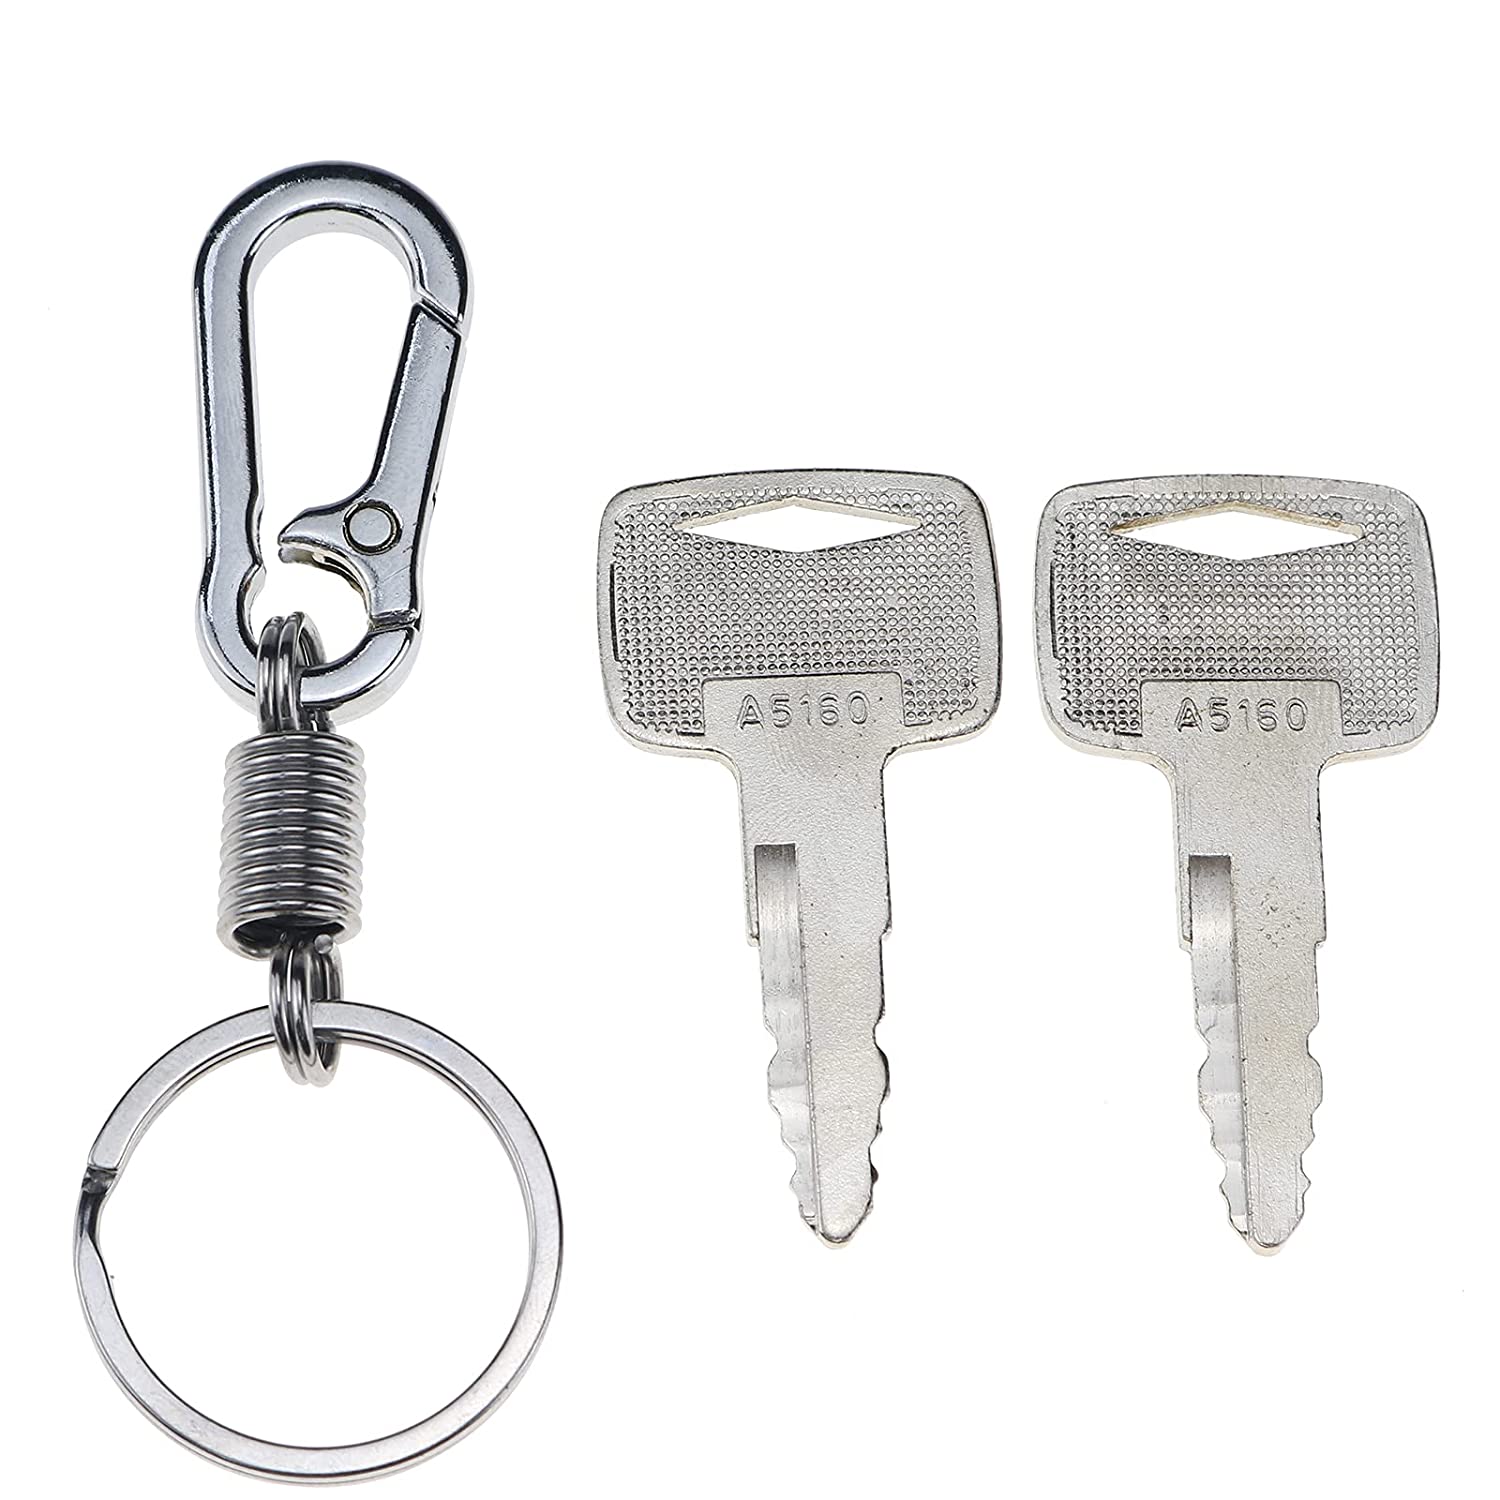 2X Ignition Keys #A5160 91A07-01910 with Key Chain Compatible with Mitsubishi Caterpillar CAT Forklift Series - KUDUPARTS